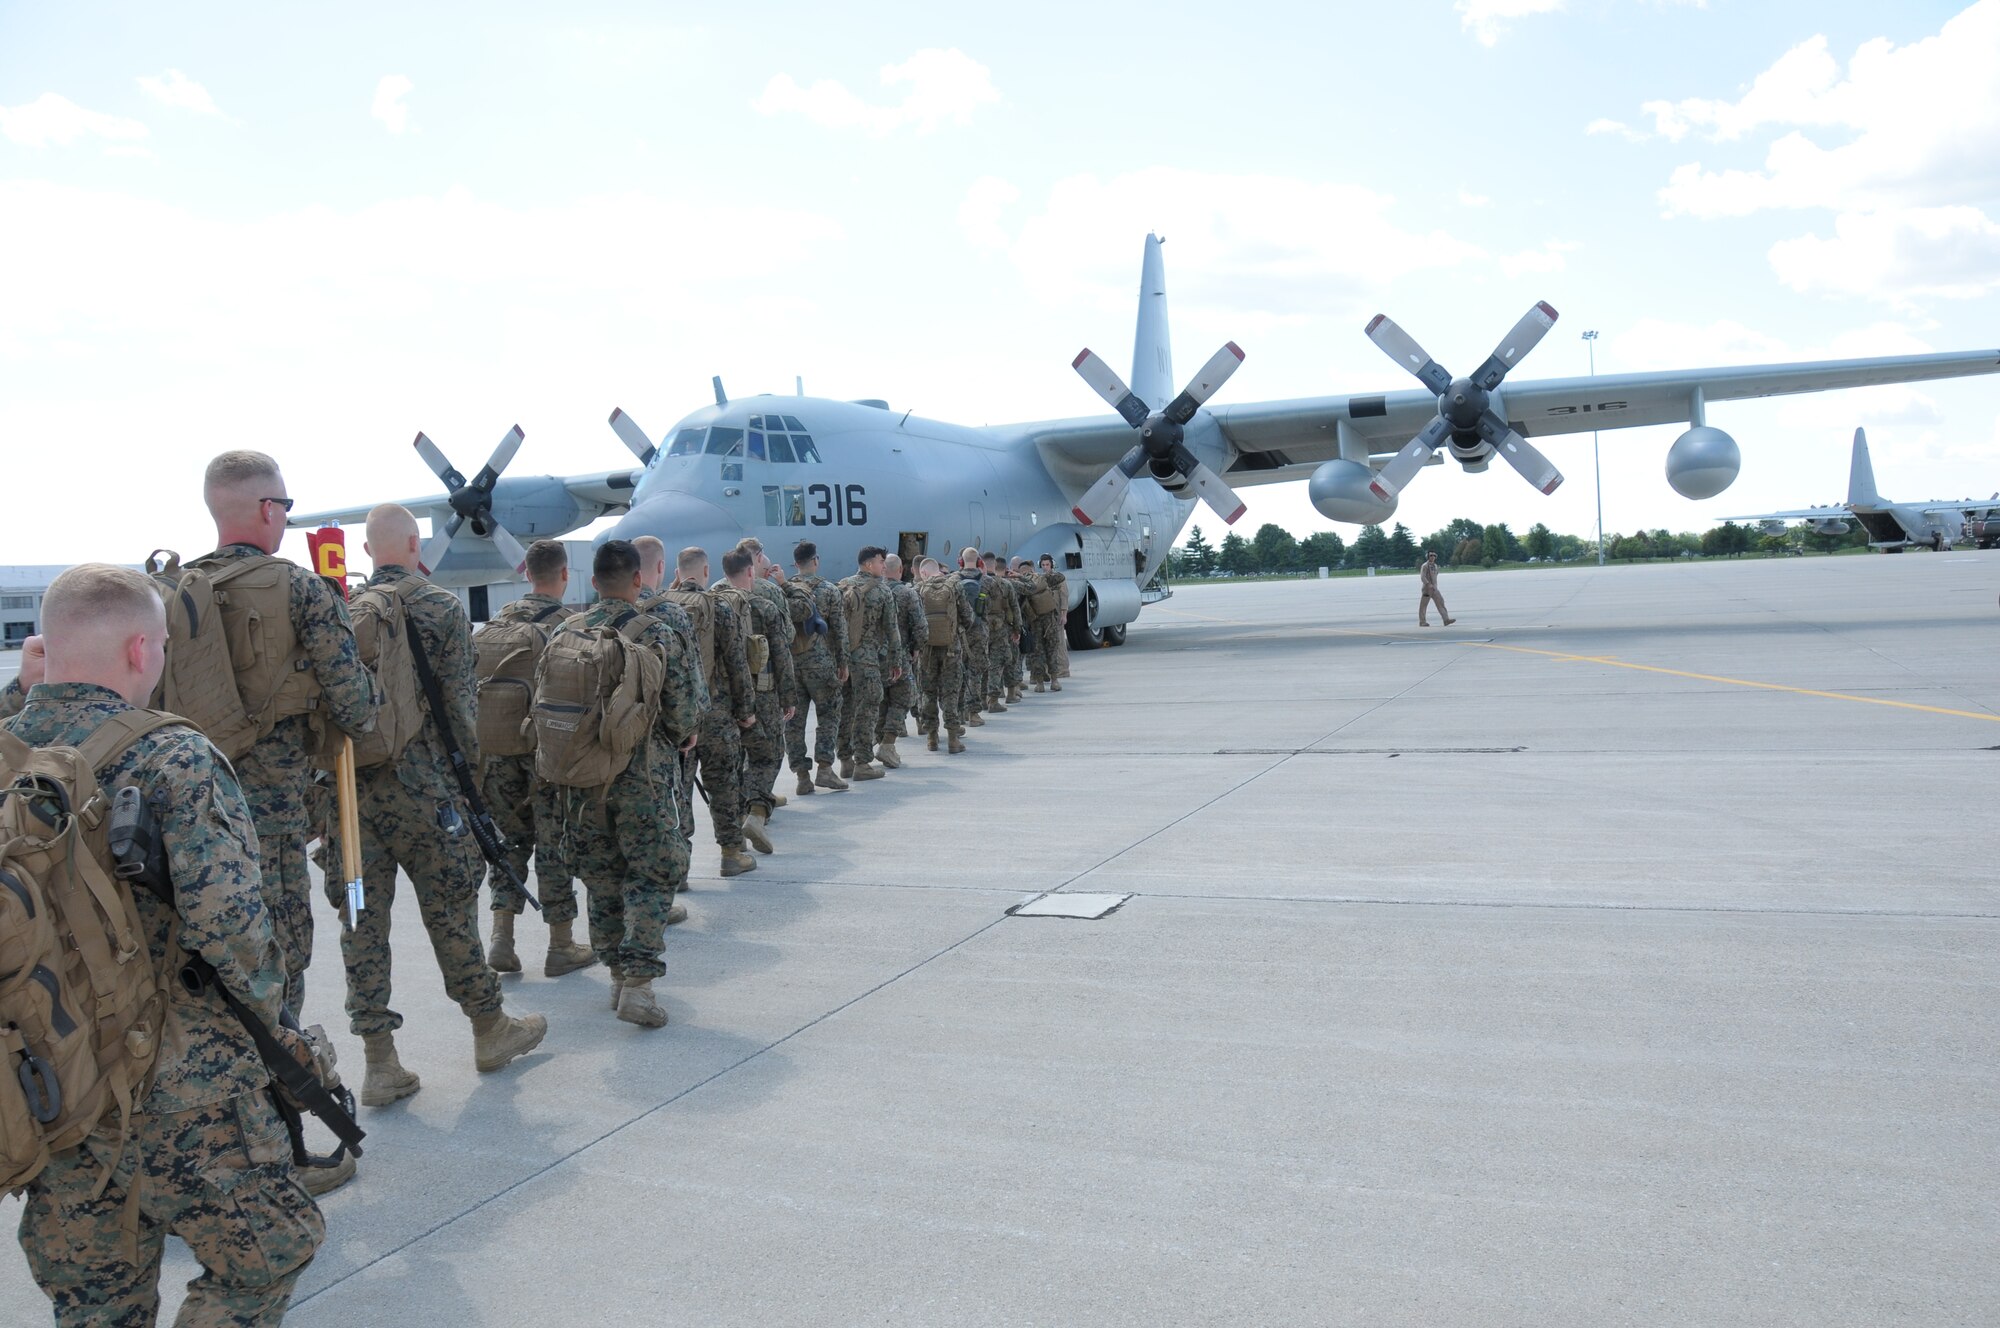 Marines from the 1st Battalion 24th Marines prepare to depart their home station of Selfridge Air National Guard Base, Mich., on Aug. 4, 2015. The Marines participated in a training exercise at the USMC Mountain Warfare Training Center in southern California. Nearly 300 Marines departed Selfridge for the training, moving on six USMC C-130 Hercules tactical airlift aircraft. The Michigan Air National Guard’s Small Air Terminal flight at Selfridge helped to facilitate the move, loading 10 pallets of equipment for transport on the C-130s for the Marines. Many Michigan-based military units utilize the capabilities of the Small Air Terminal facility at Selfridge to facilitate major troop and equipment movement. (U.S. Air National Guard photos by Master Sgt. David Kujawa and Staff Sgt. Samara Taylor / Released)